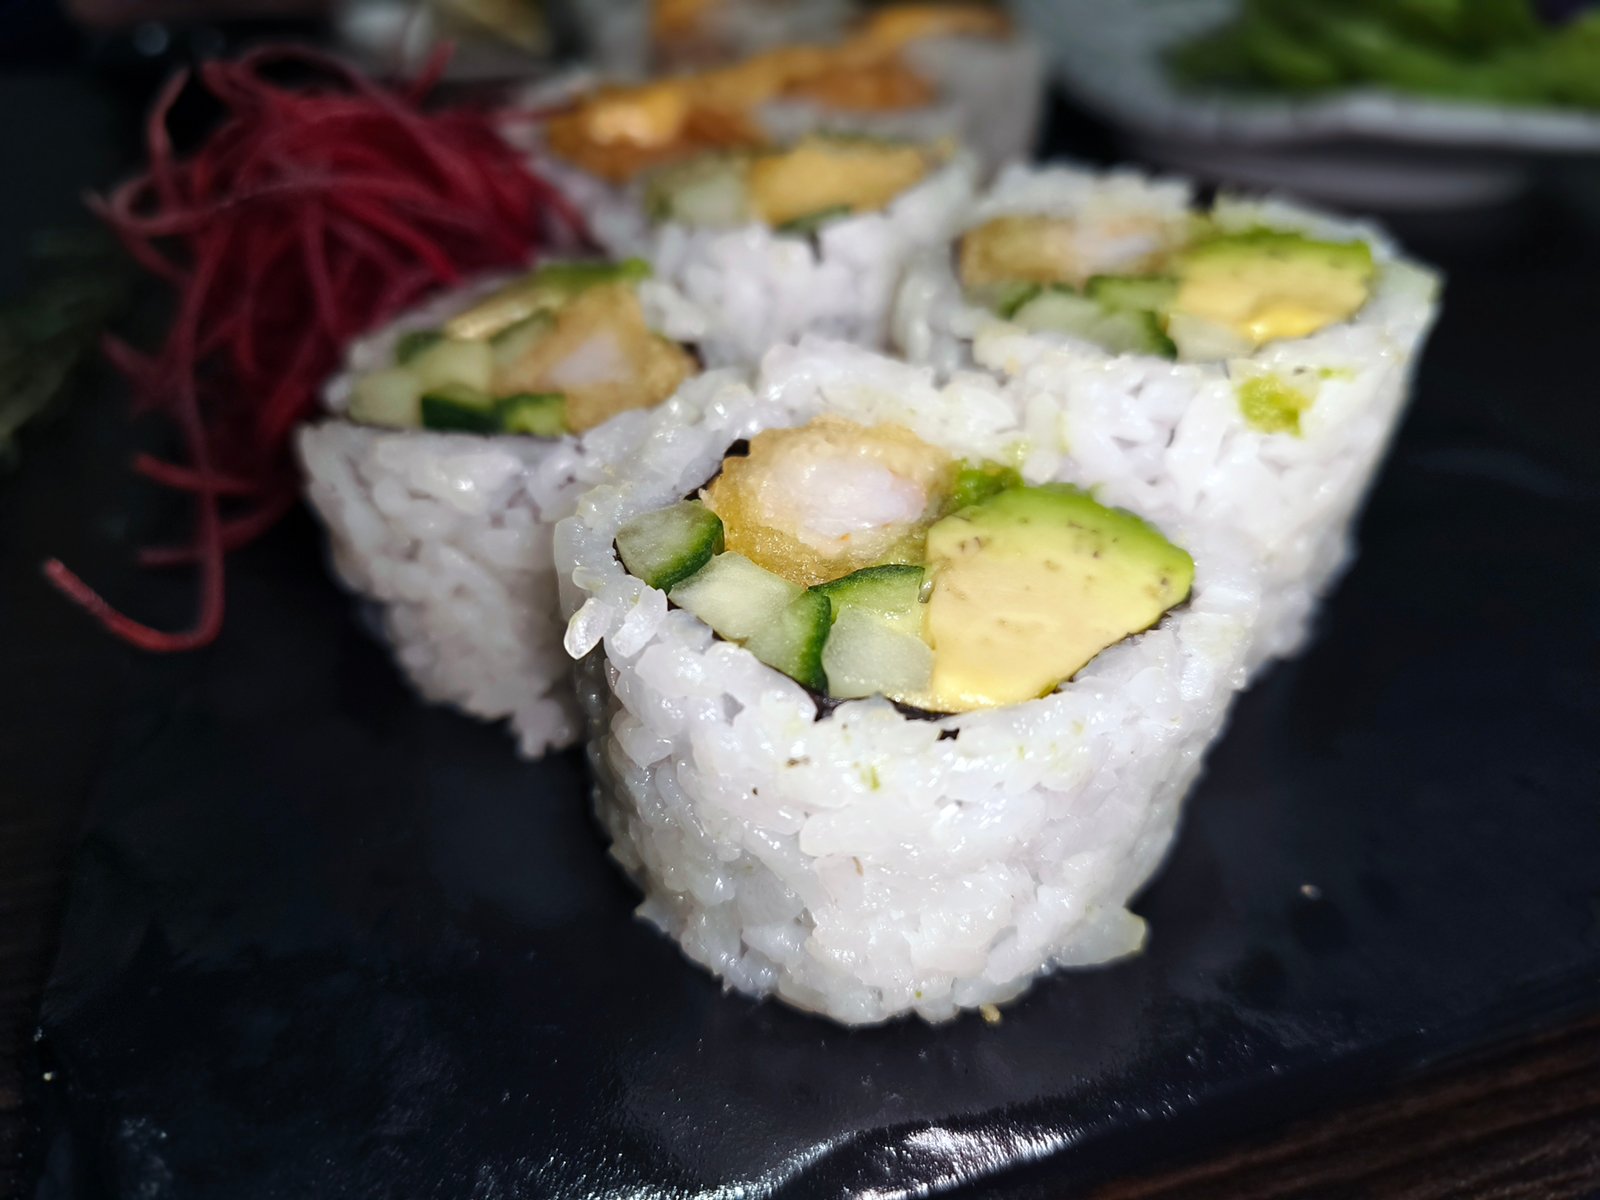 Close-up image of sushi rolls with avocado and cucumber on a black plate, garnished with red threads on the side.